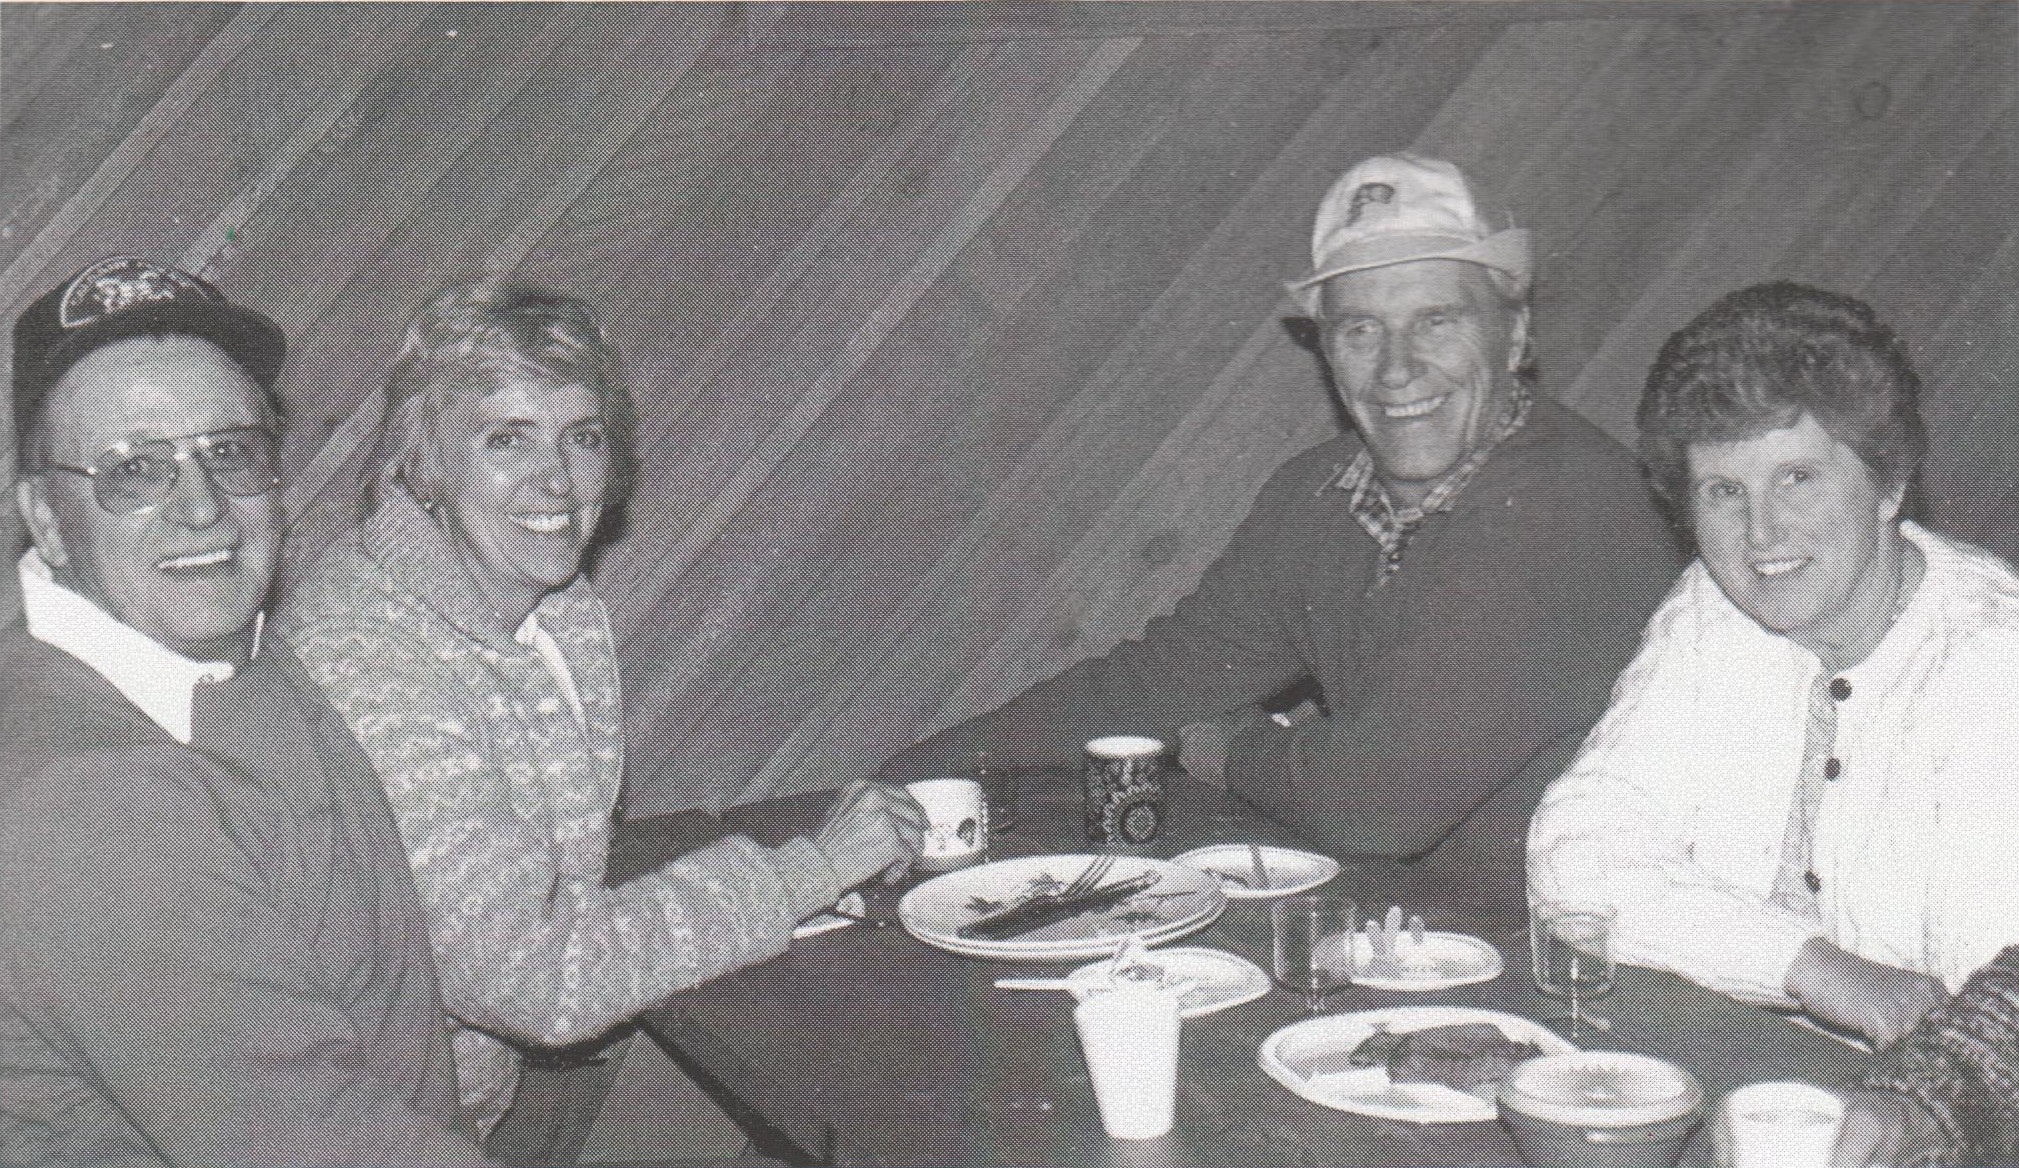 Leigh Blackwell, Dianne Edgelow, Clayton Edgelow and Jean Blackwell relaxing after a well-earned supper at the 1984 Church campout.